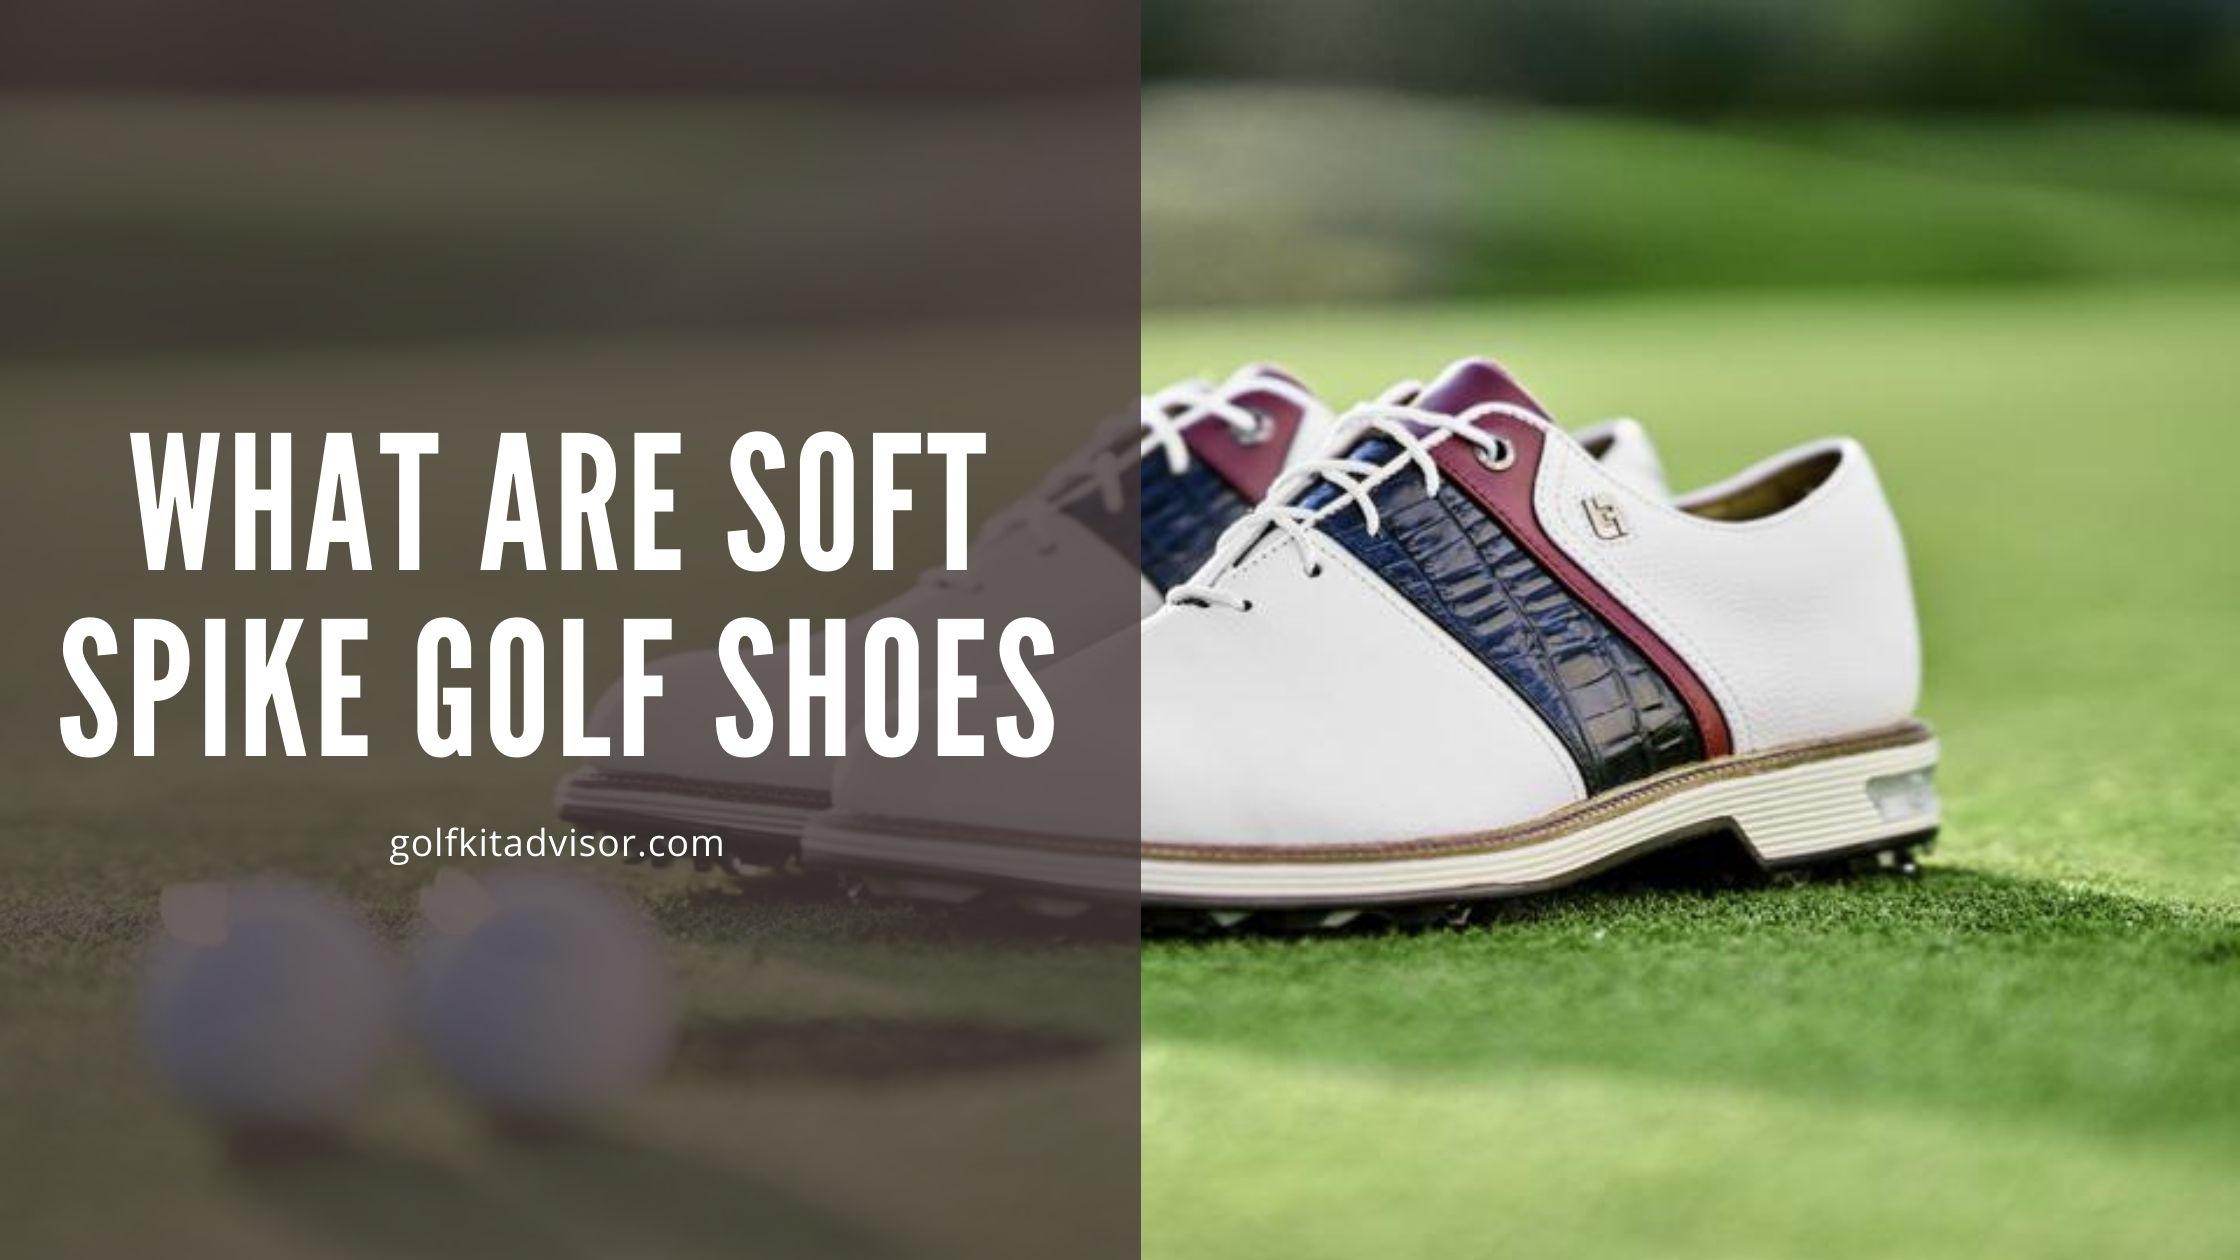 What Are Soft Spike Golf Shoes